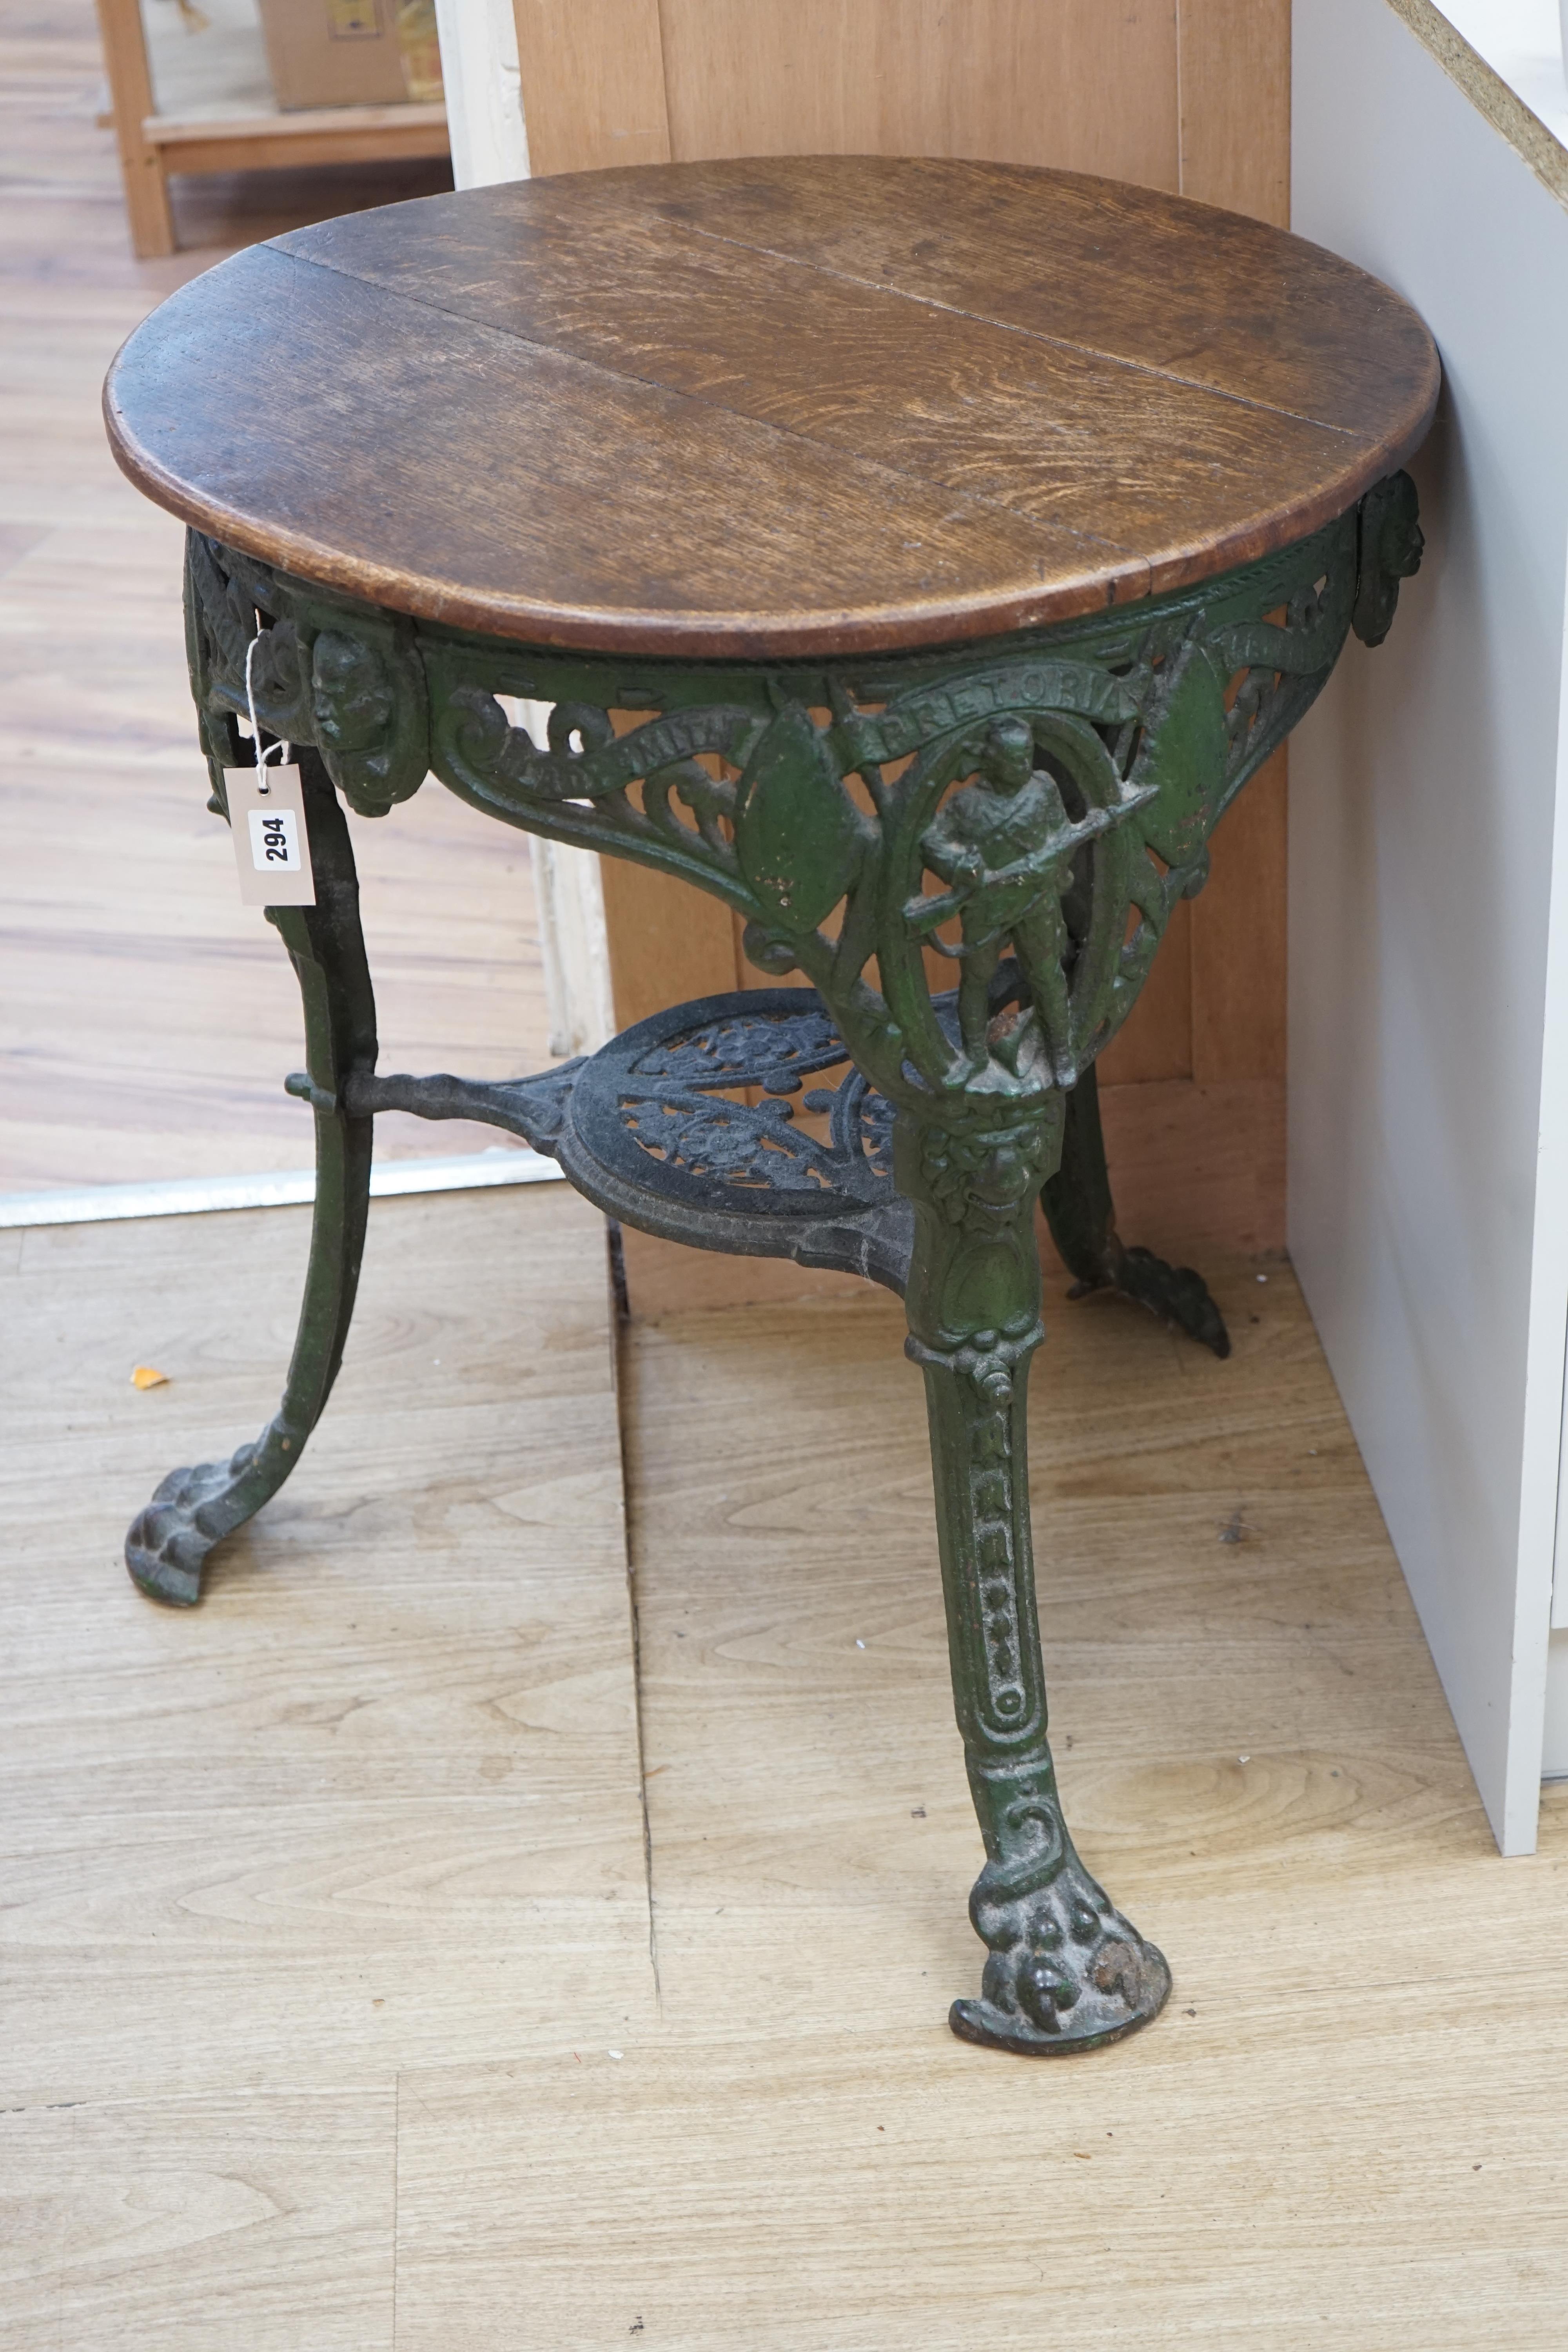 A rare early 20th century Boer War commemorative cast iron pub table, decorated with standing soldiers beneath Ladysmith, Pretoria and Mafeking scrolls, legs bearing registered number 364112, the circular oak top 62cm di